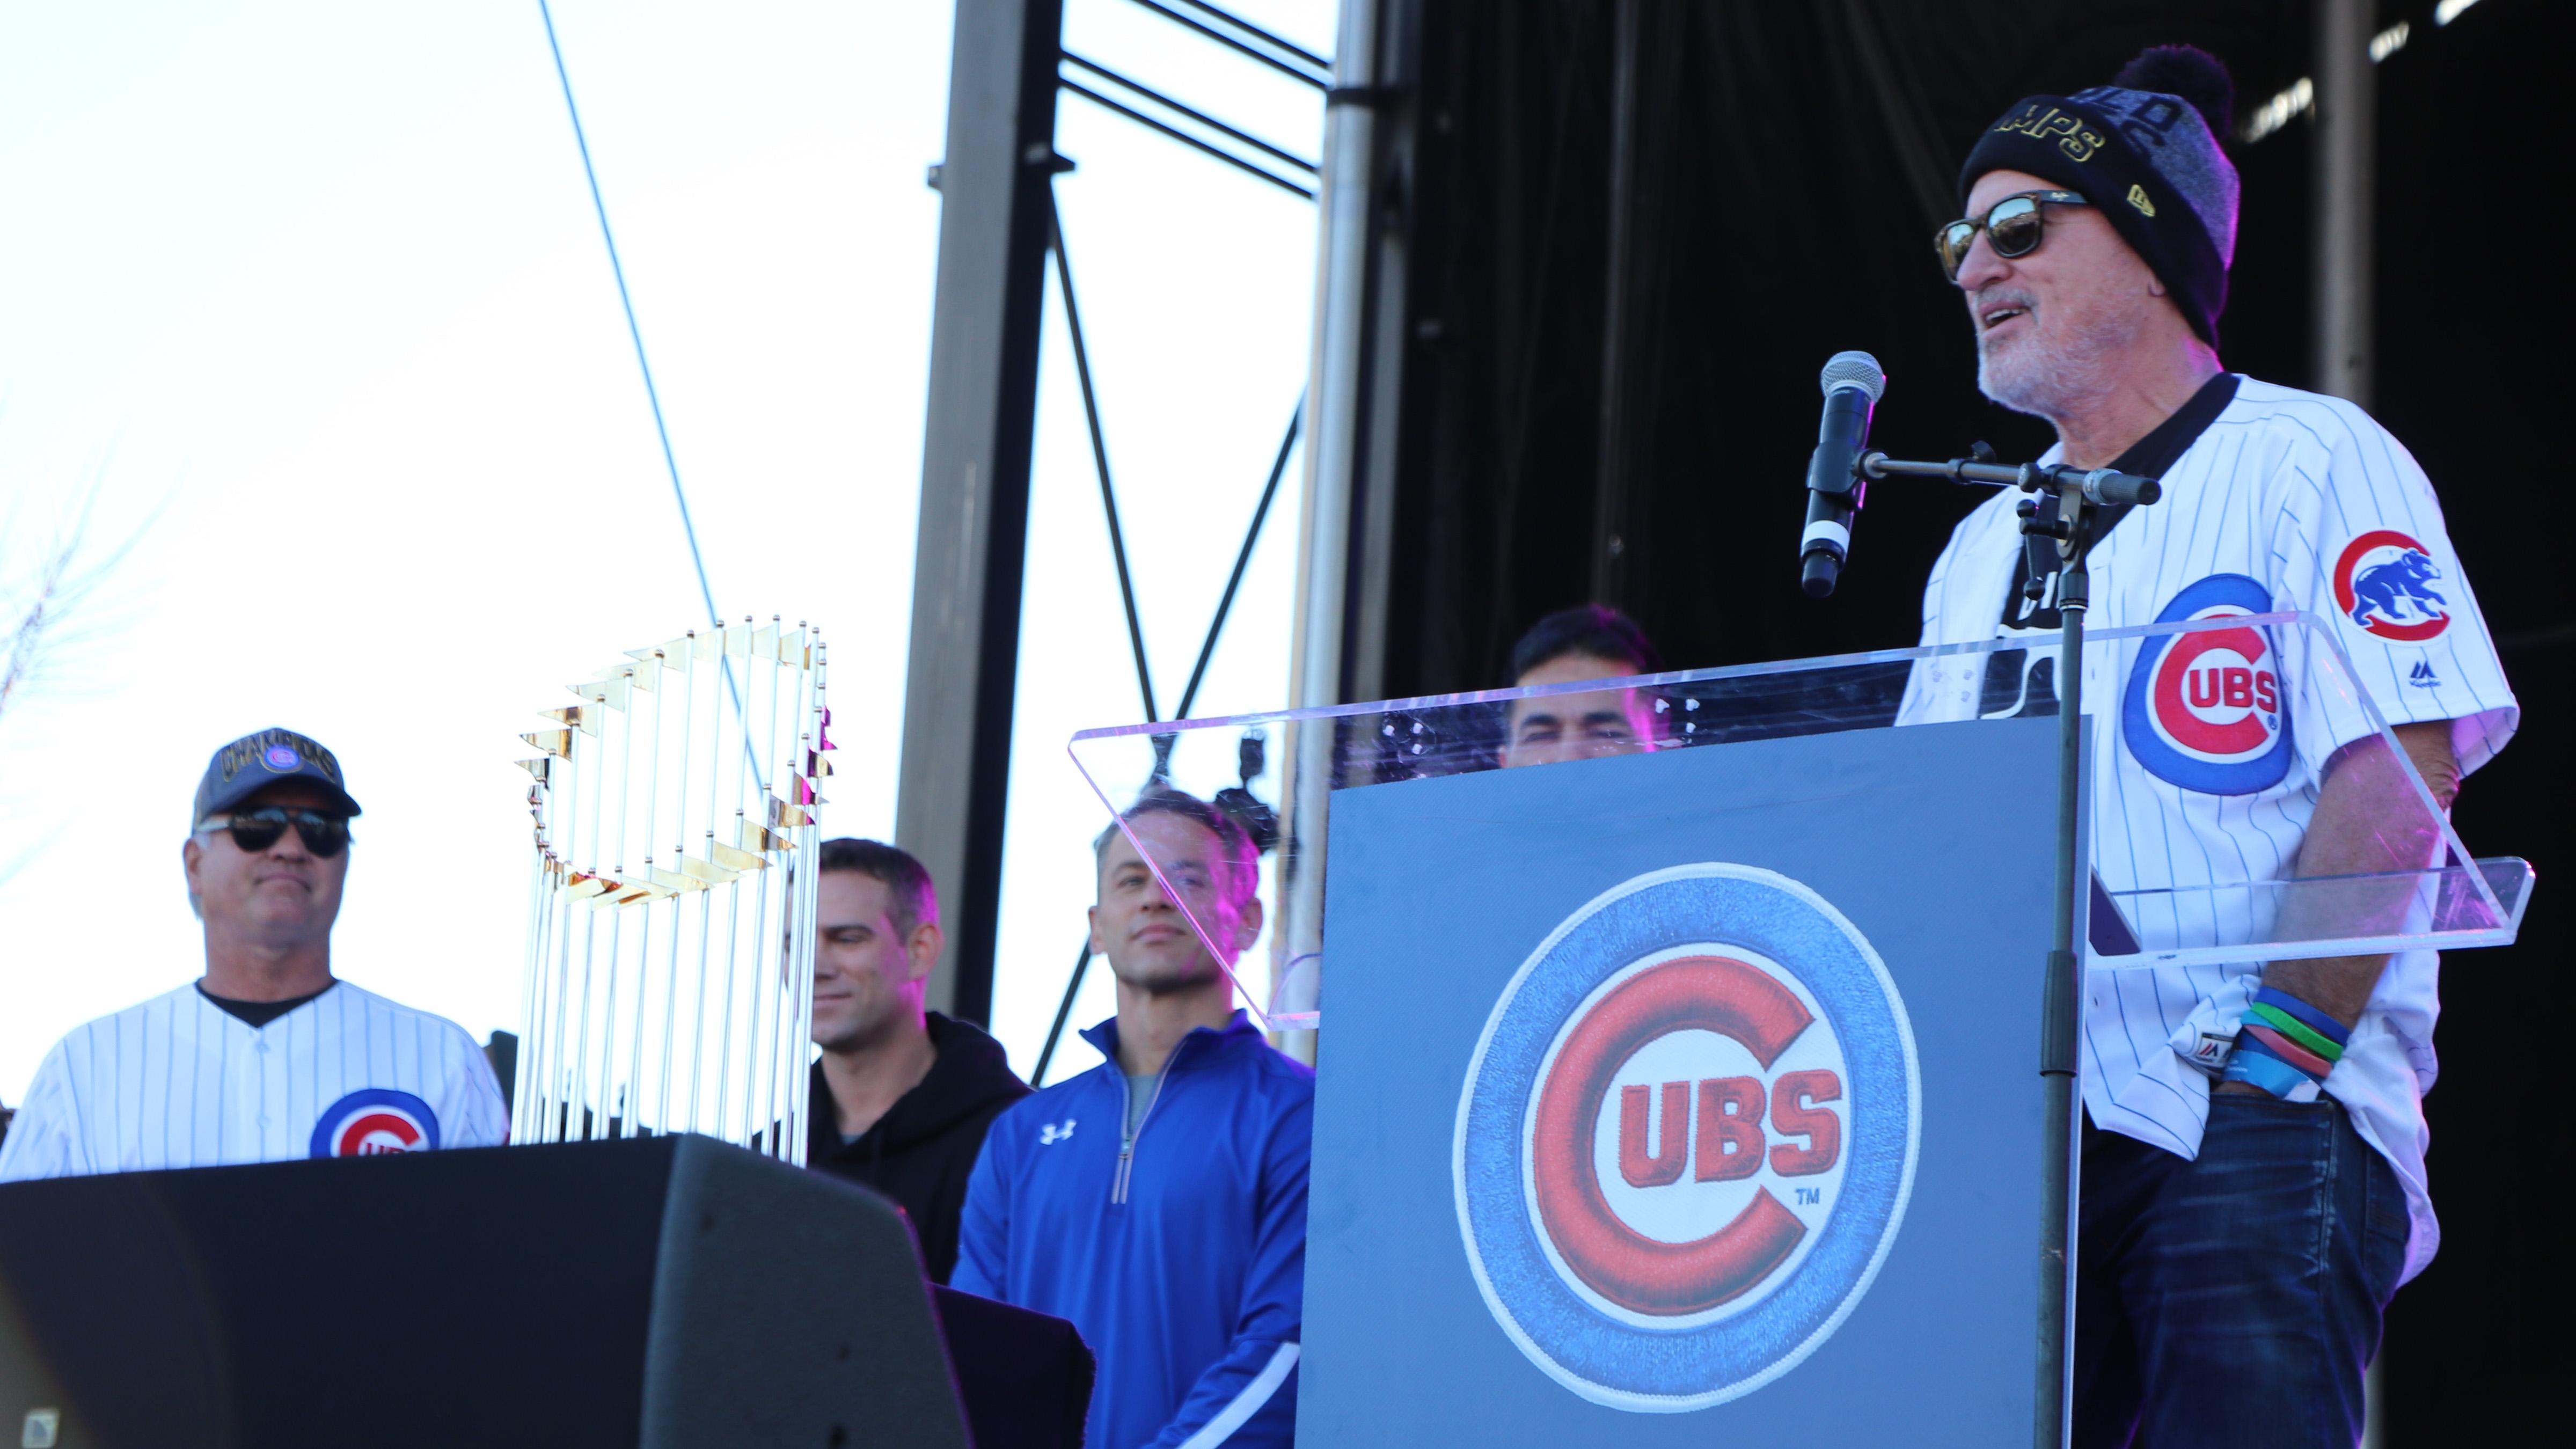 Chicago Cubs are a hit on parade circuit